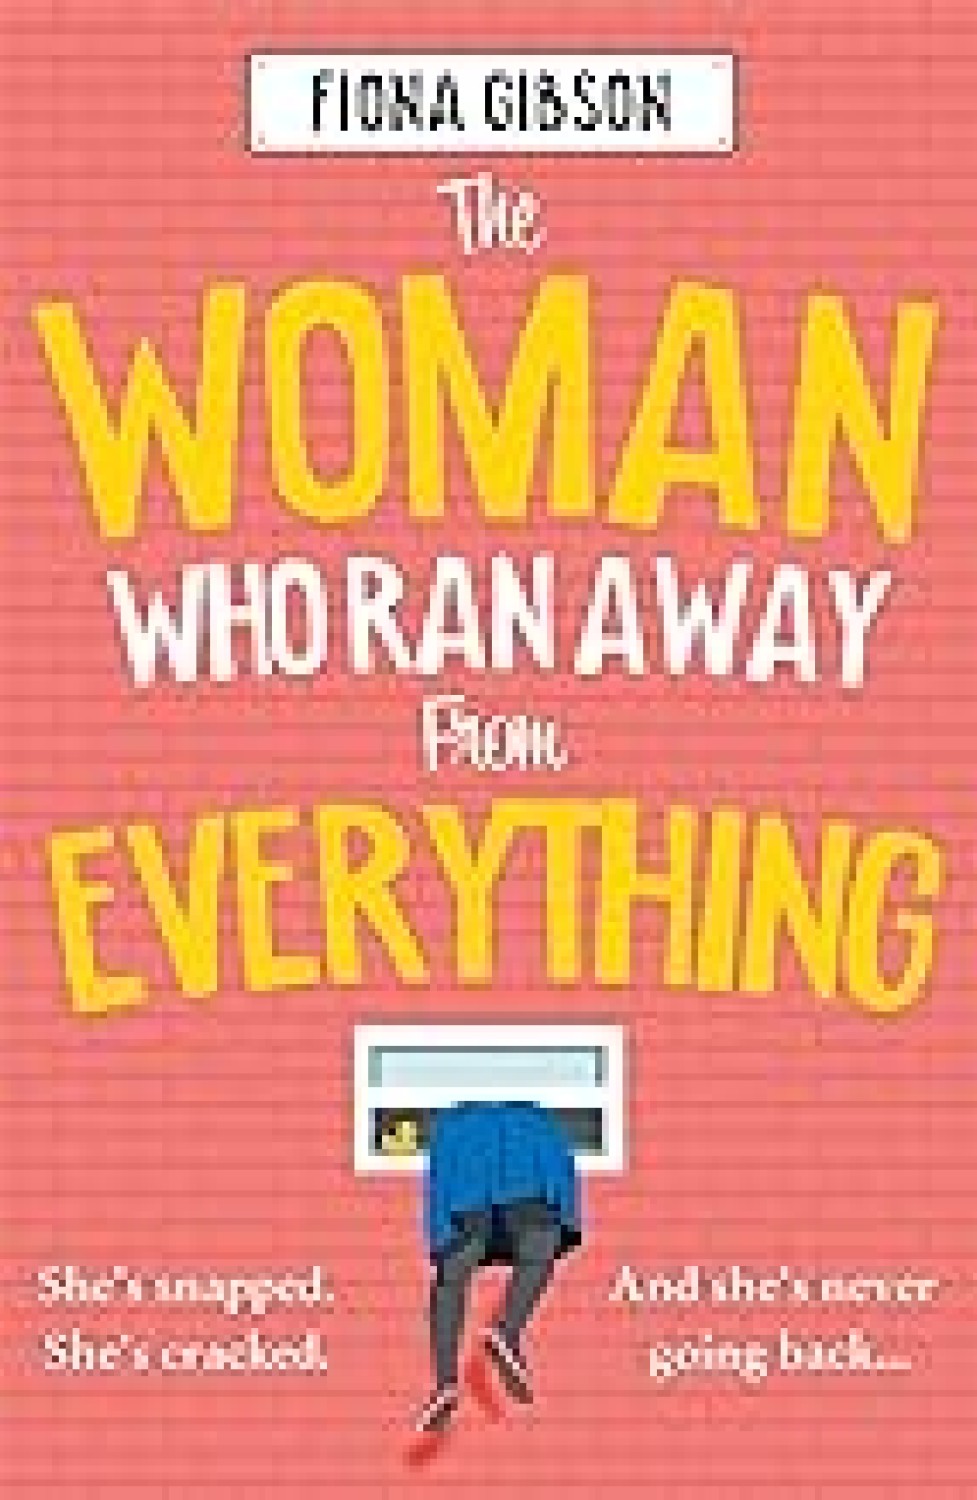 THE WOMAN WHO RAN AWAY FROM EVERYTHING